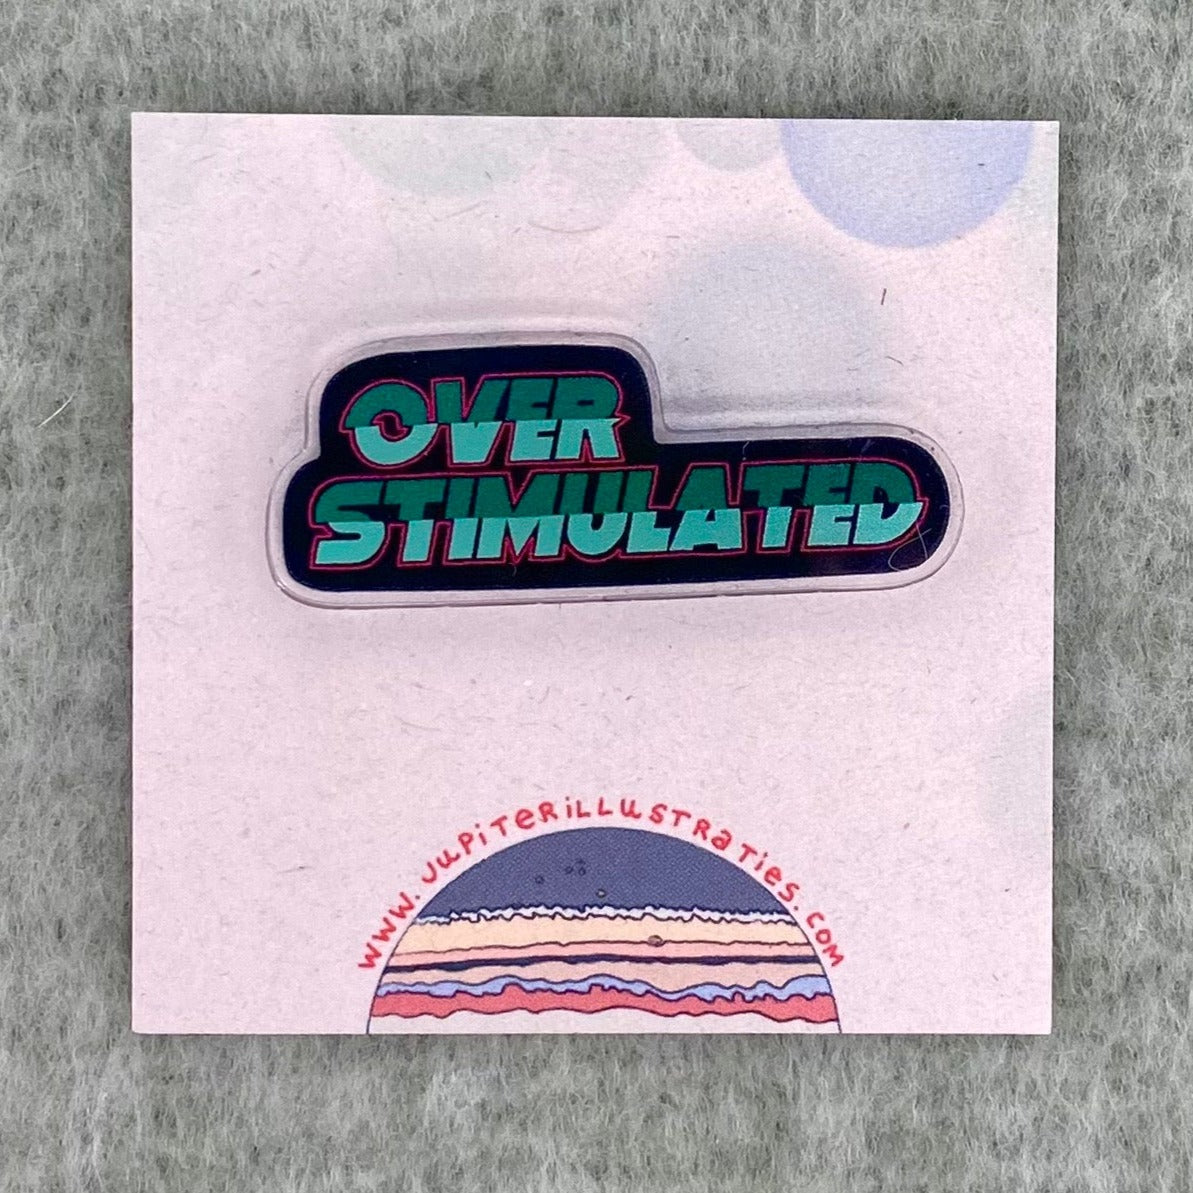 Pin: Overstimulated